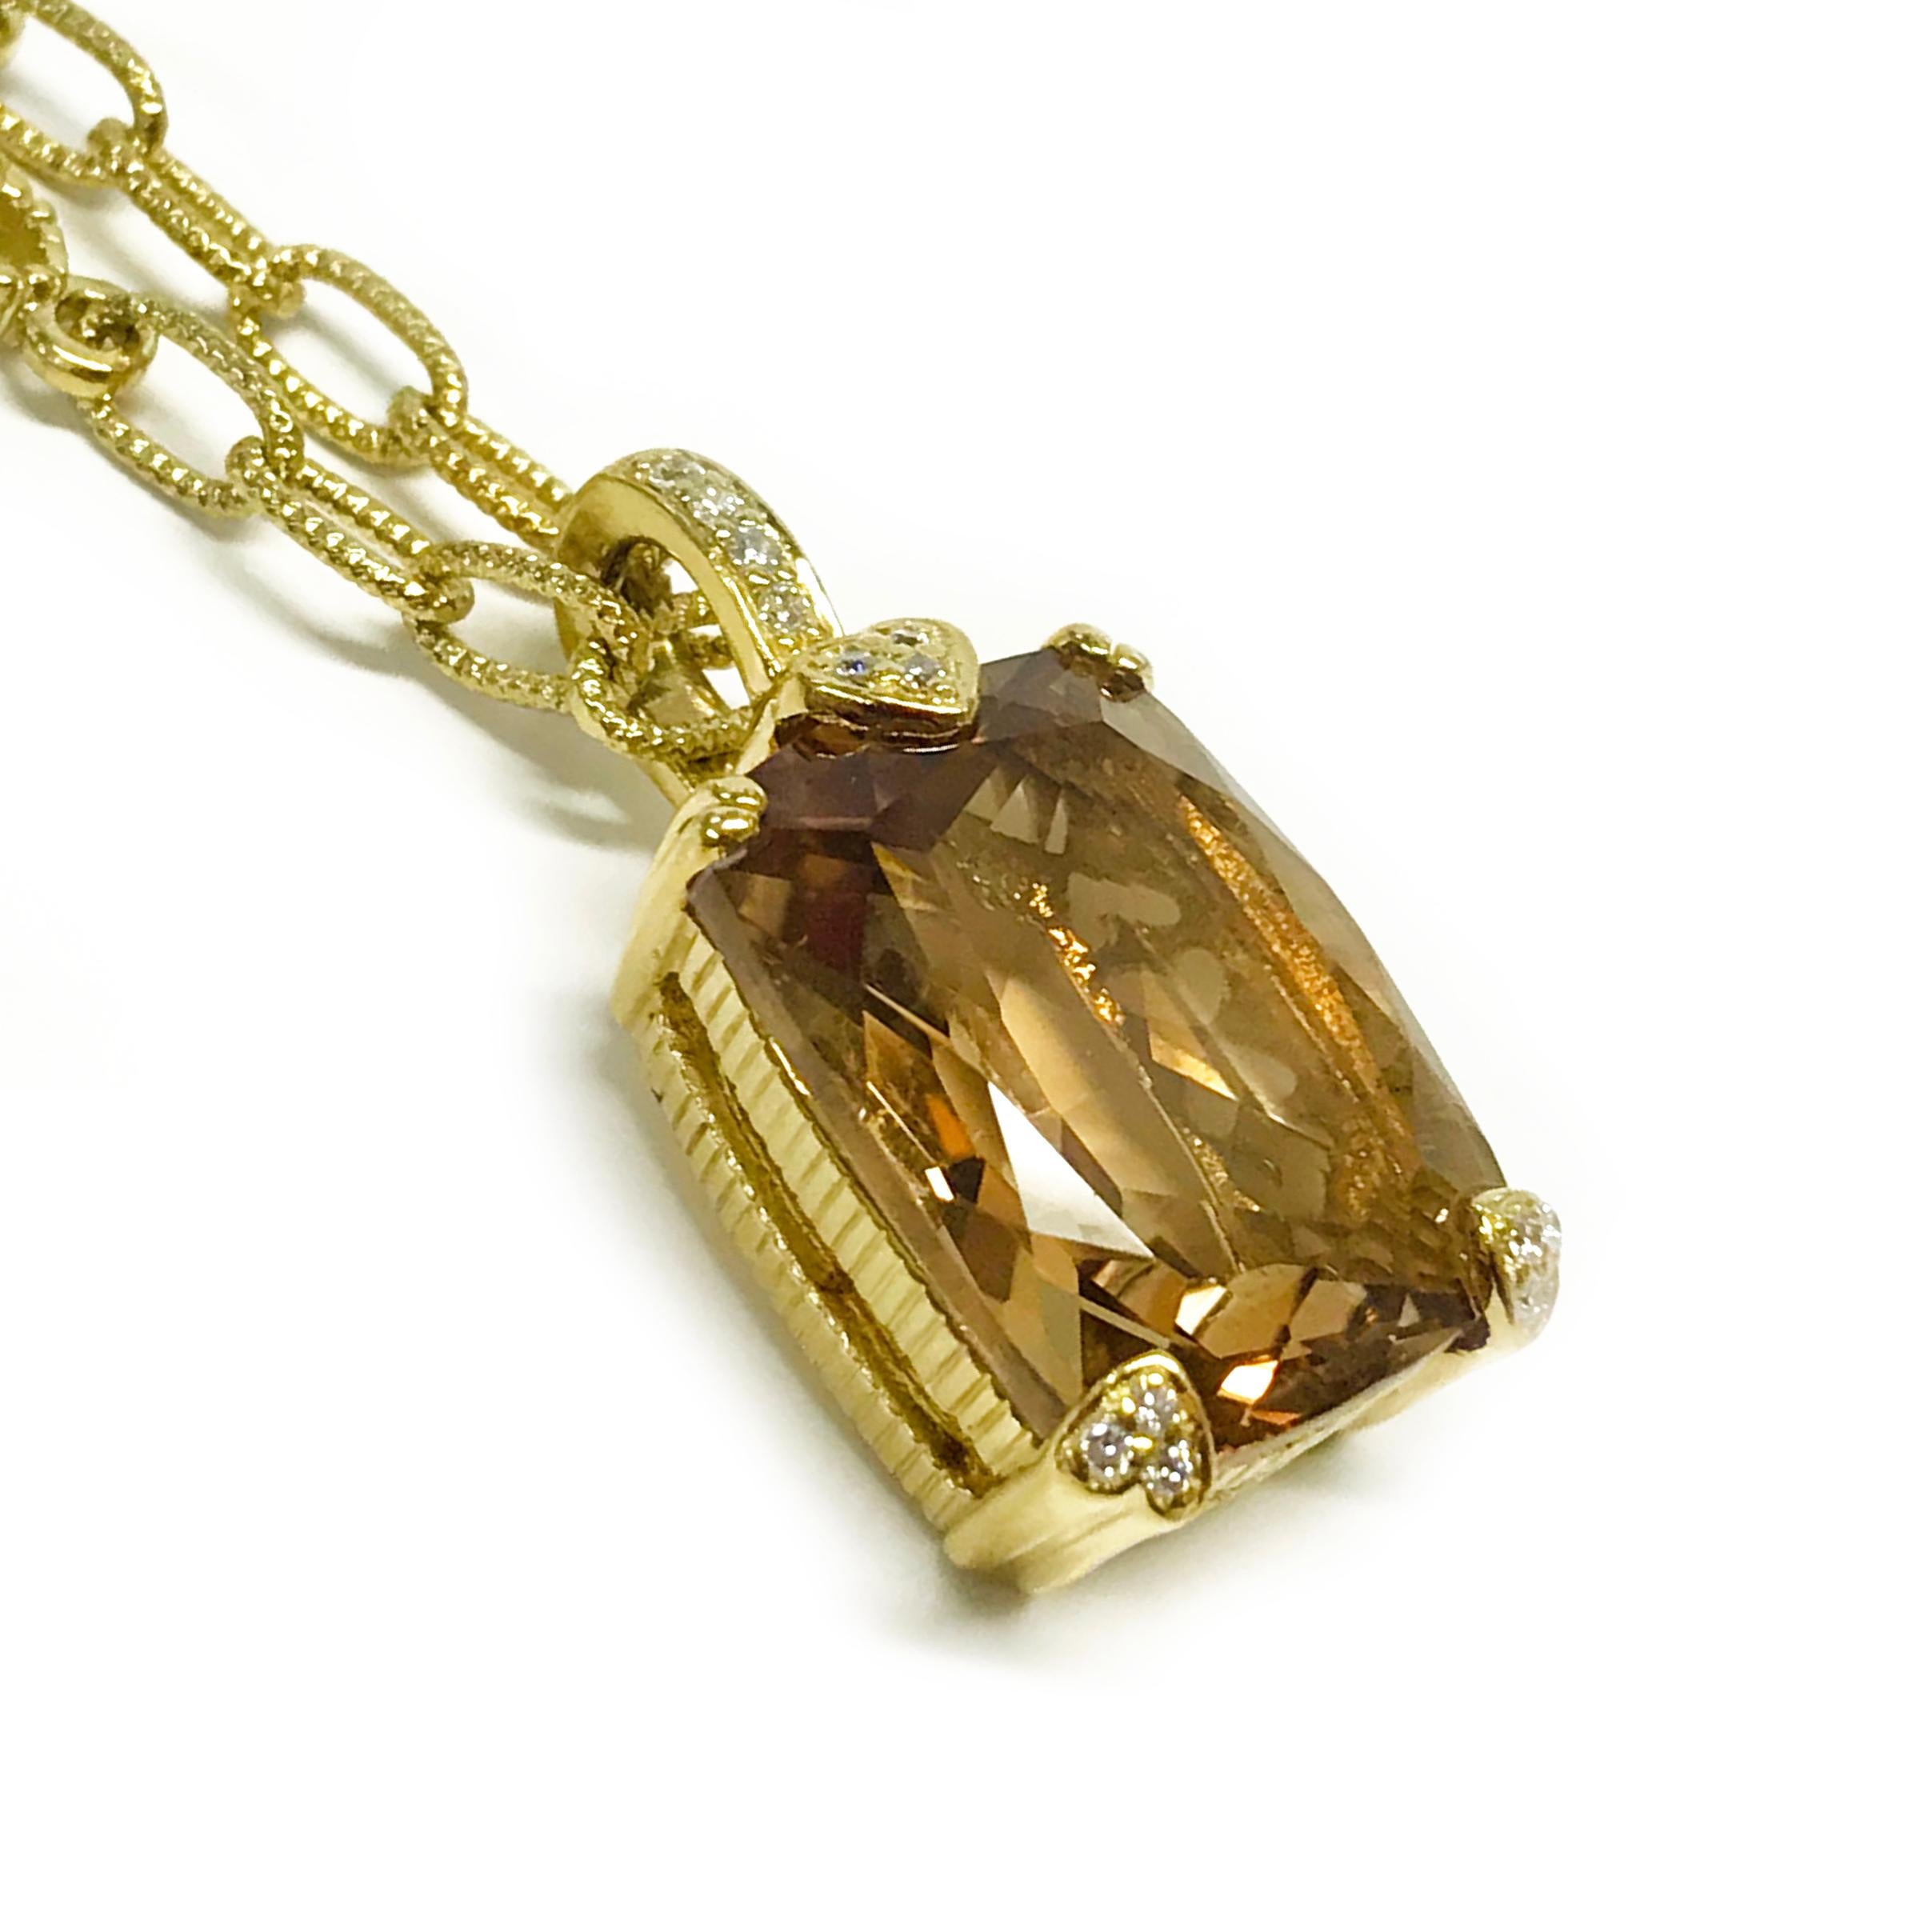 Judith Ripka 18 Karat Diamond Citrine Necklace Pendant. The pendant features a large cushion-cut Citrine with thirteen diamonds on the heart-shaped prongs and enhancer bail. The pendant measures 13.3mm high (not including the bail) x 7.9mm wide x